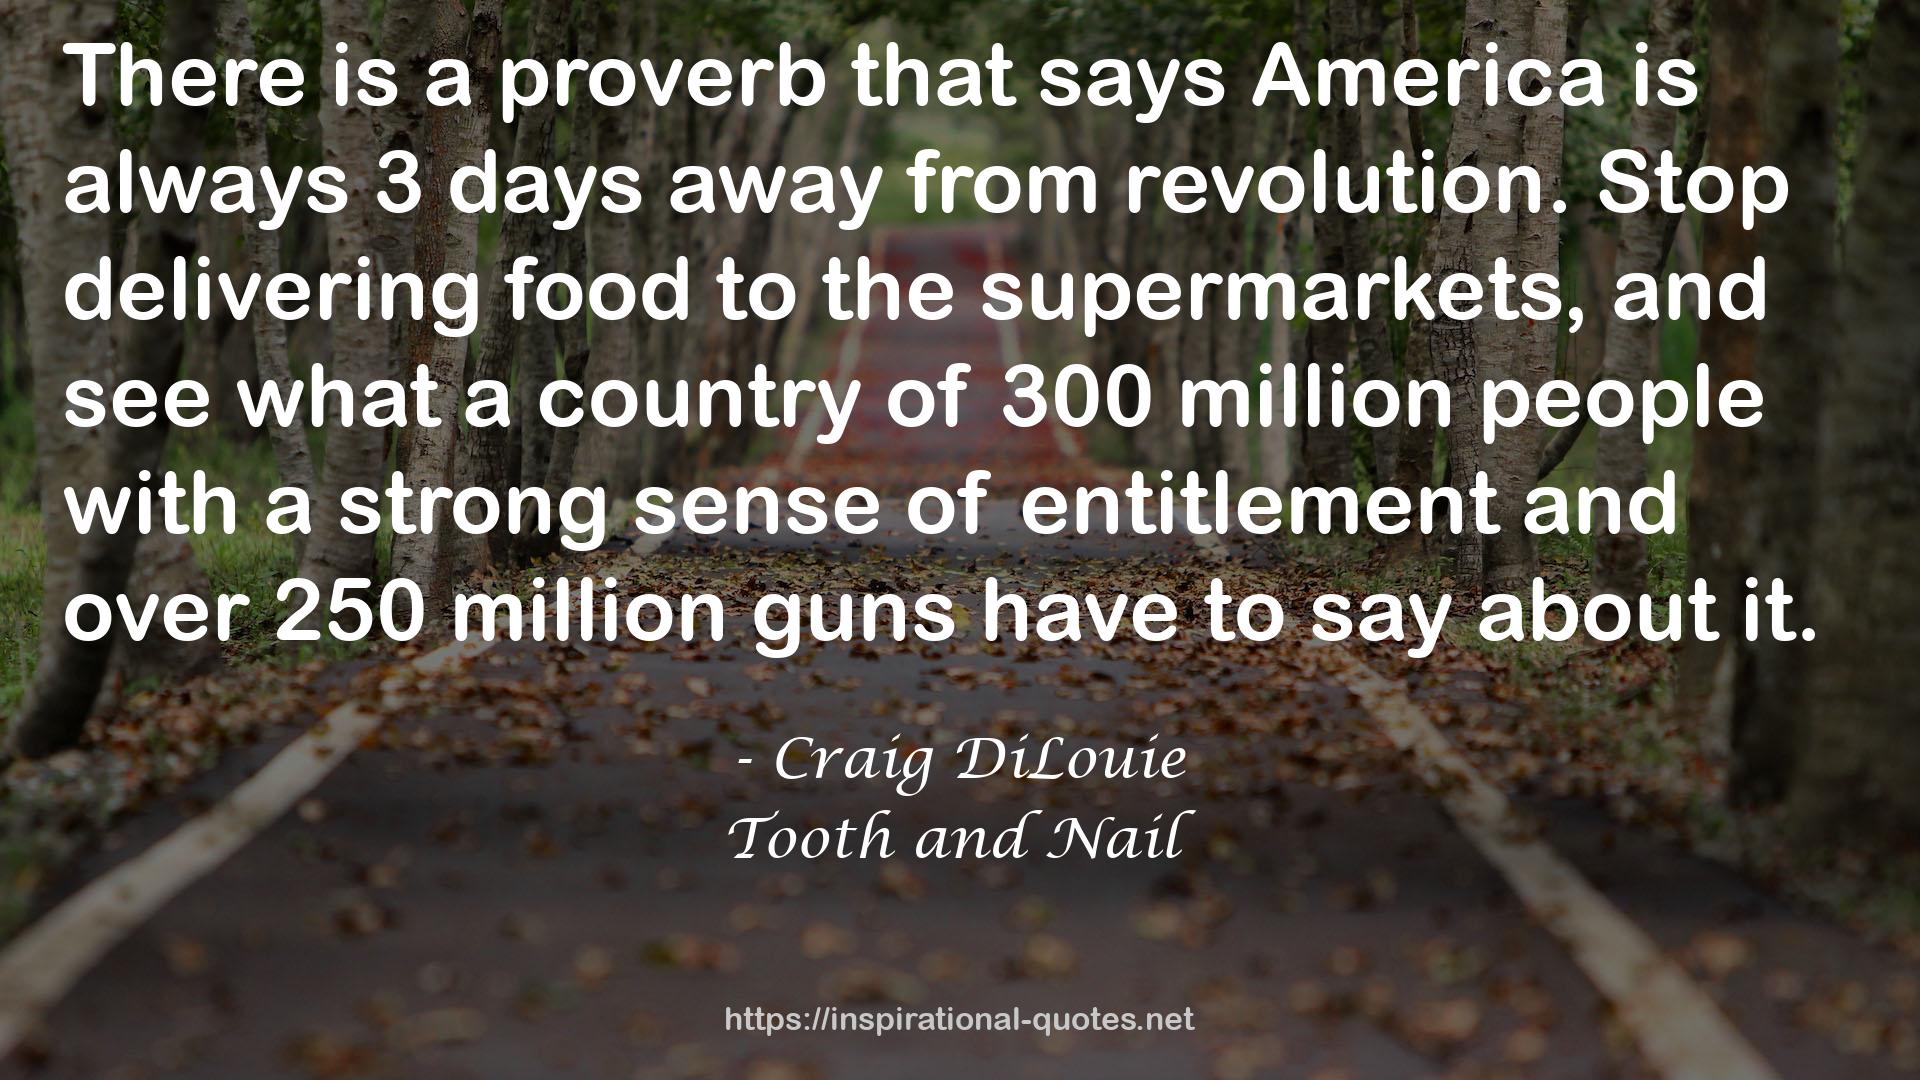 Tooth and Nail QUOTES